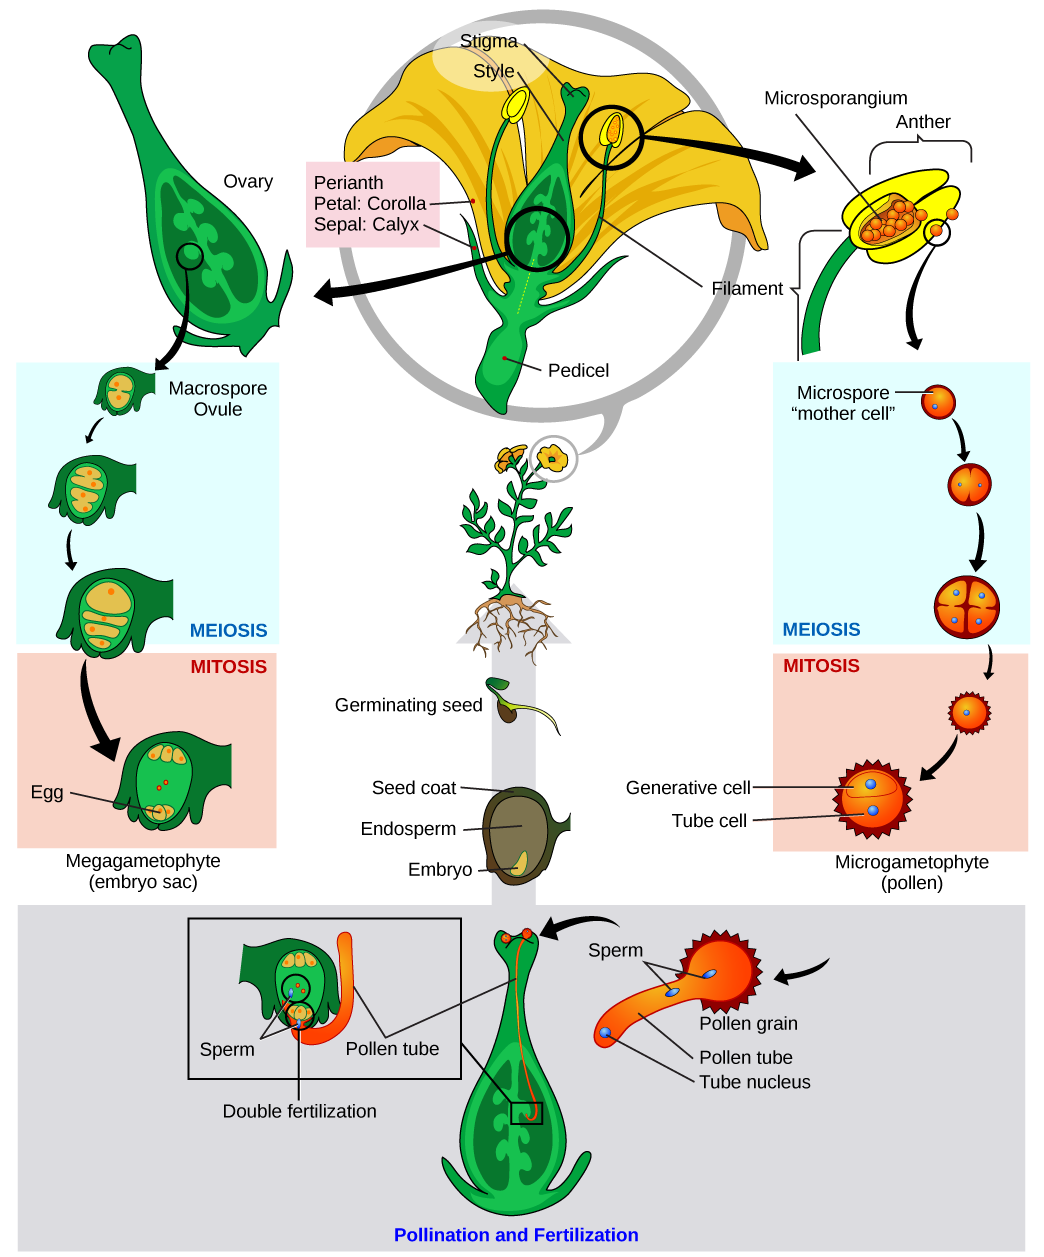 Illustration shows a tulip in cross section at the top of a clockwise circular series of images. An enlargement of the anther shows microsporangium inside. One microspore (the “mother cell”) undergoes meiosis to the four-cell stage. The mother cell then undergoes mitosis to become a microgametophyte, or pollen grain. Counterclockwise from the flower cross section, an ovary is shown with several macrospore ovules inside. One is shown developing into the embryo sac through meiosis then mitosis. At the bottom of the illustration, the pollen grain lands on the stigma of a flower, and a pollen tube grows from the pollen grain down inside the style to the ovary. The pollen tube contains a pollen tube nucleus and two sperm. The sperm fertilize the egg and the polar nuclei within the embryo sac (double fertilization).